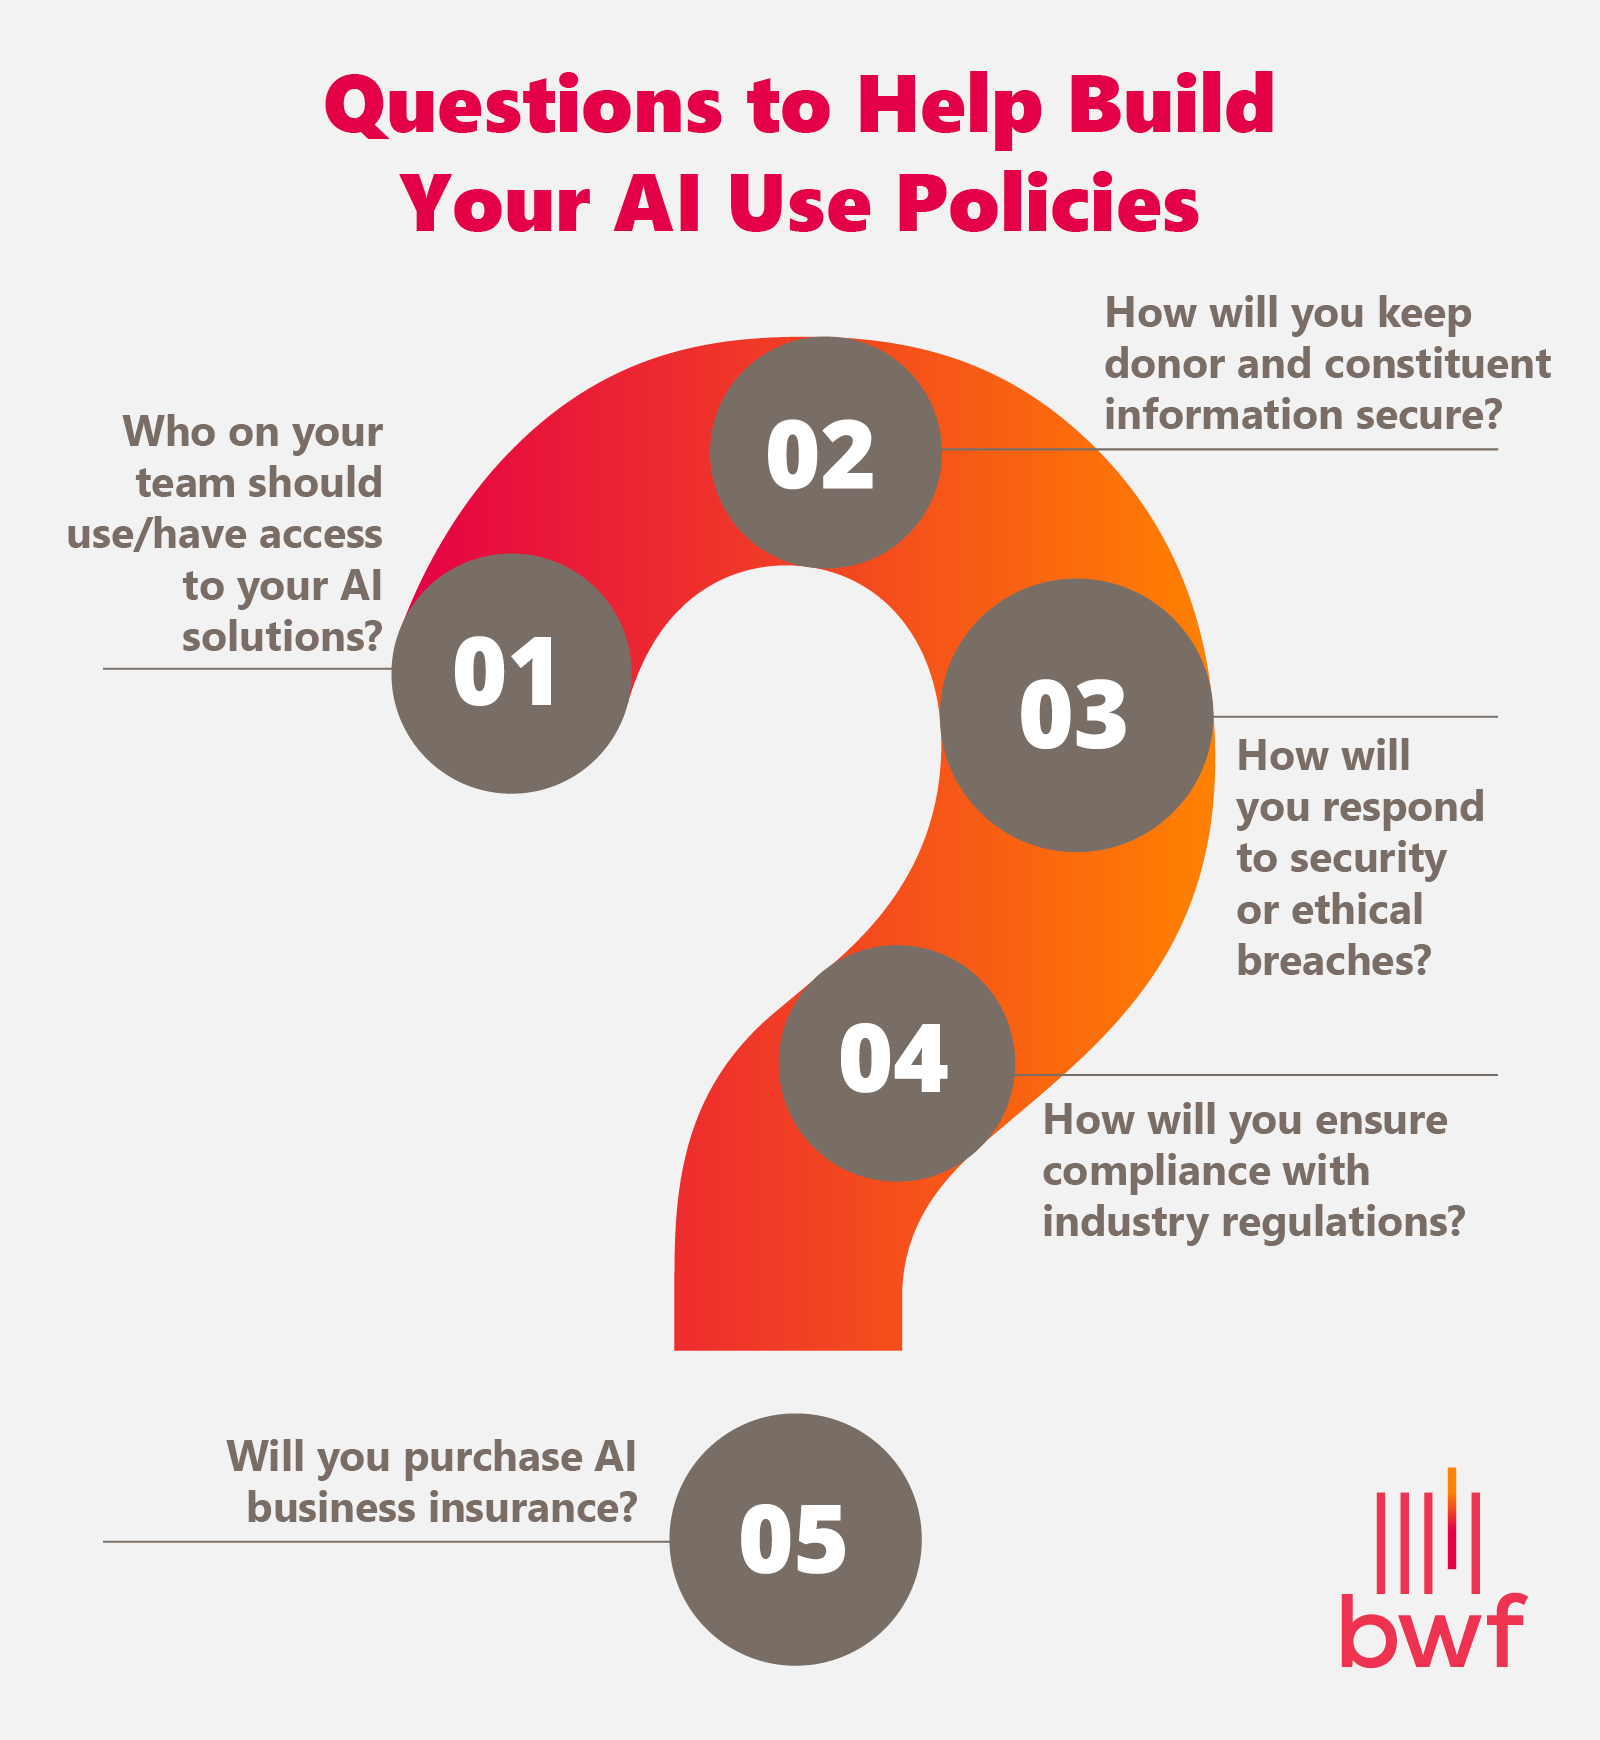  Questions to ask when building a nonprofit AI policy (listed below) 